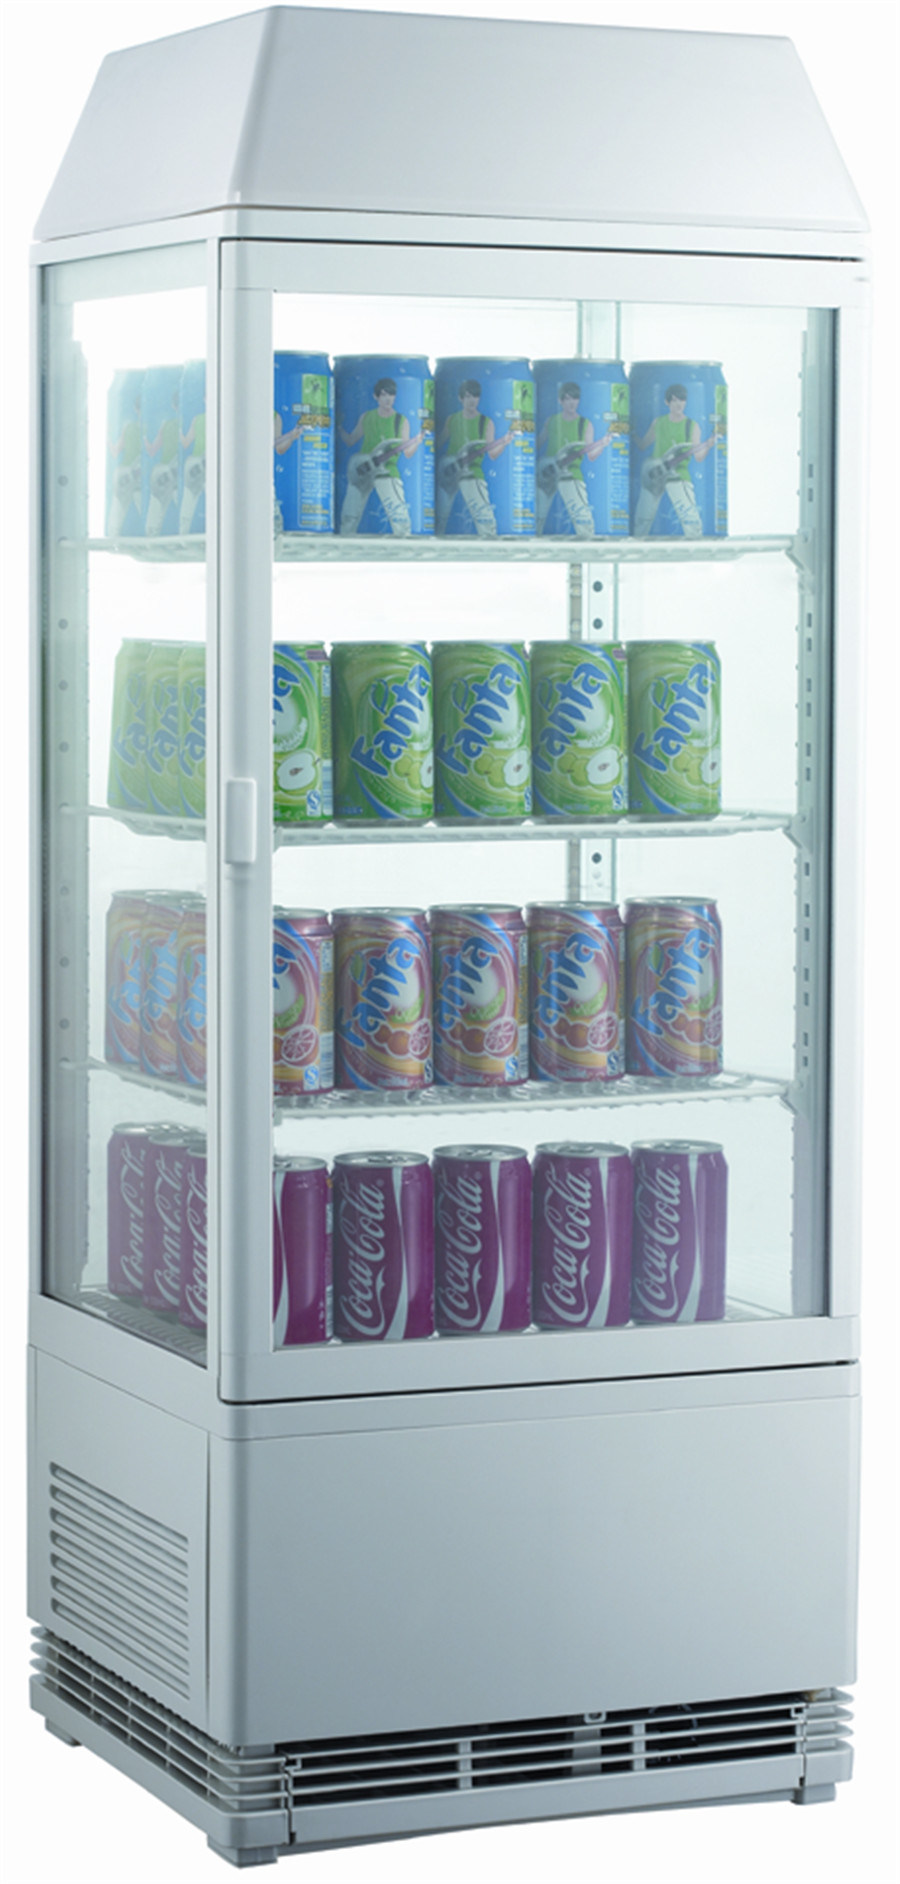 Display Refrigerator with Light Box for Displaying Drink (GRT-RT78L-2)